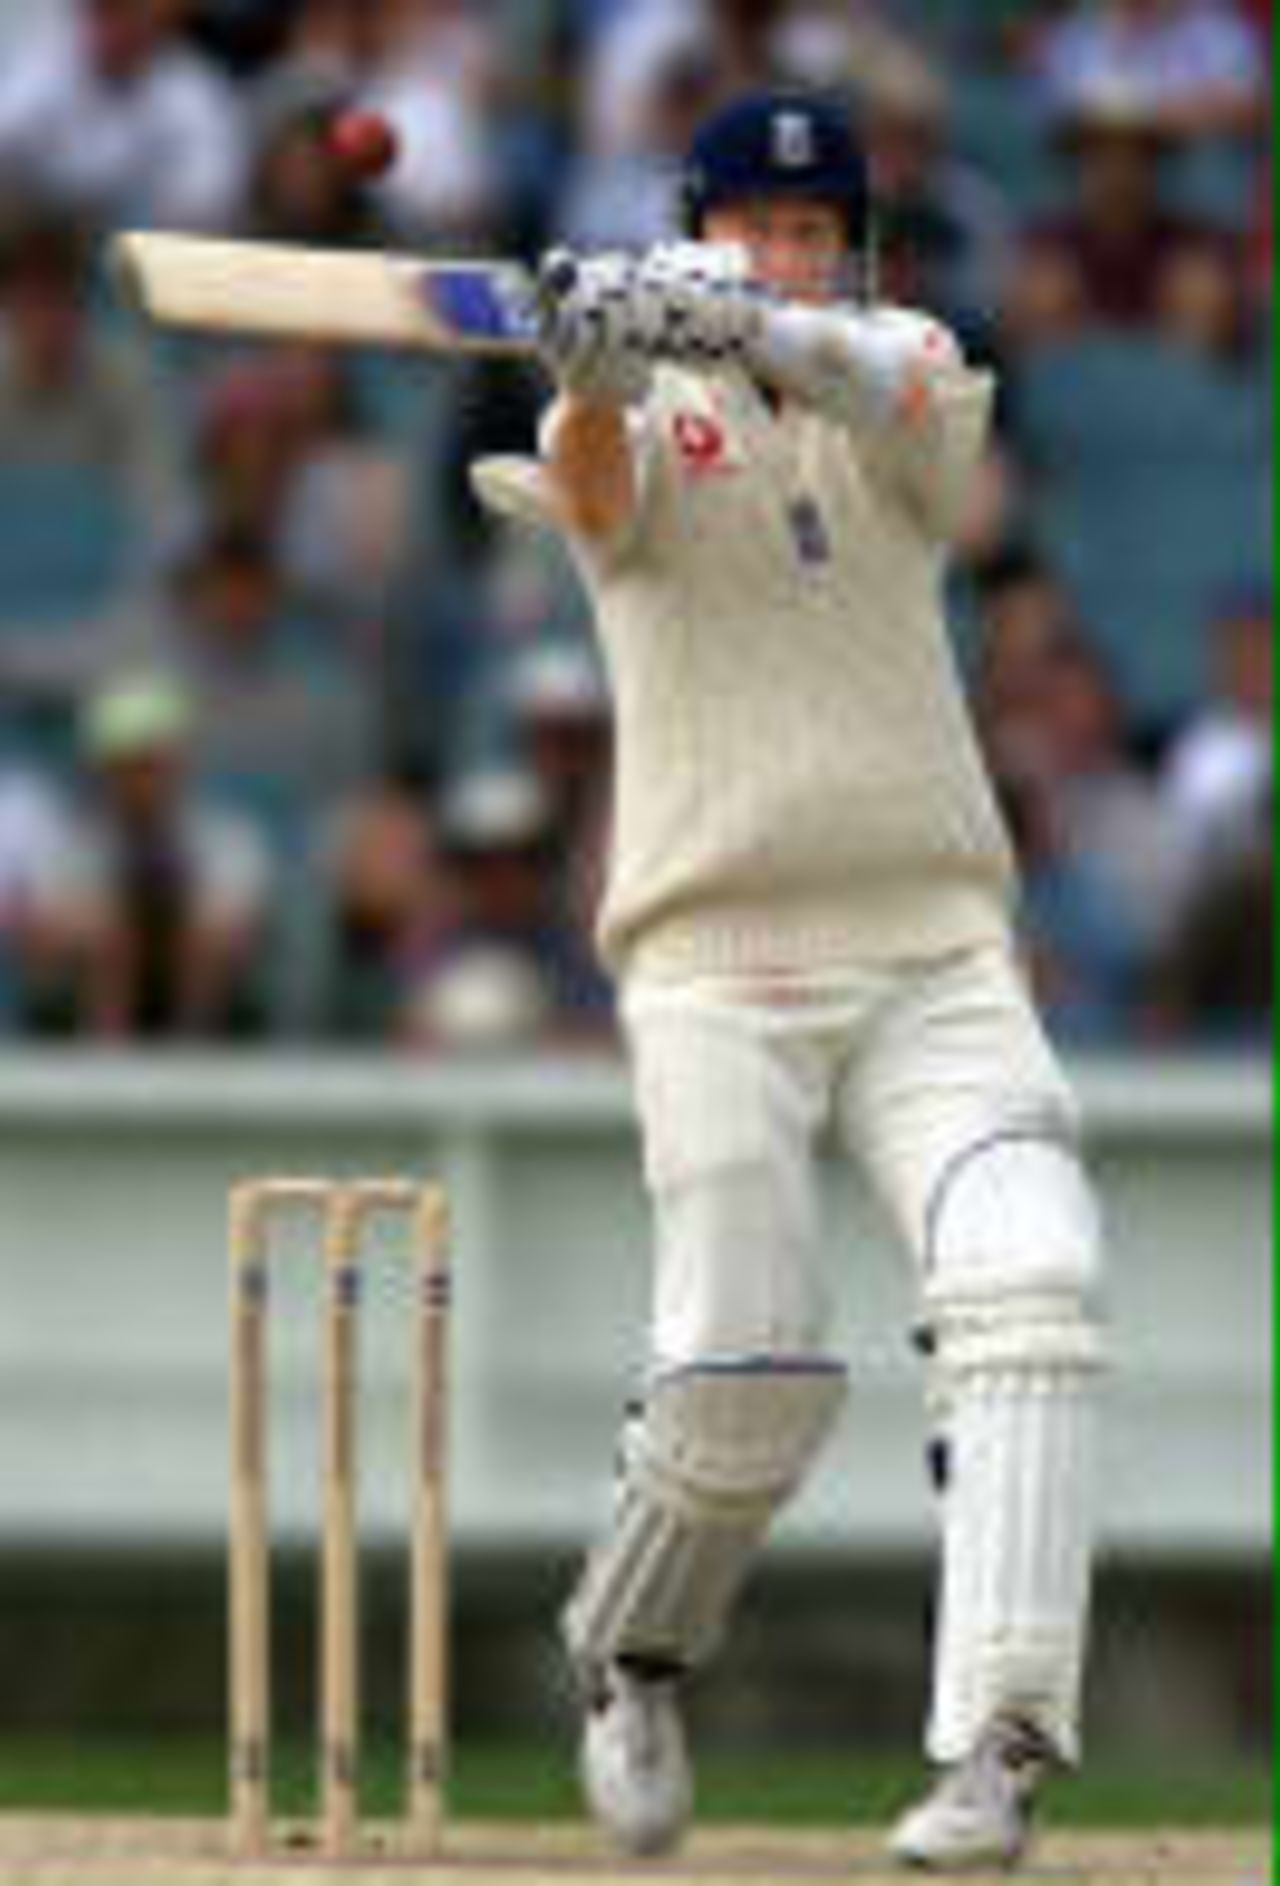 Mullally swats a boundary - The Ashes, 1998/99, 4th Test Australia v England Melbourne Cricket Ground 29 December 1998